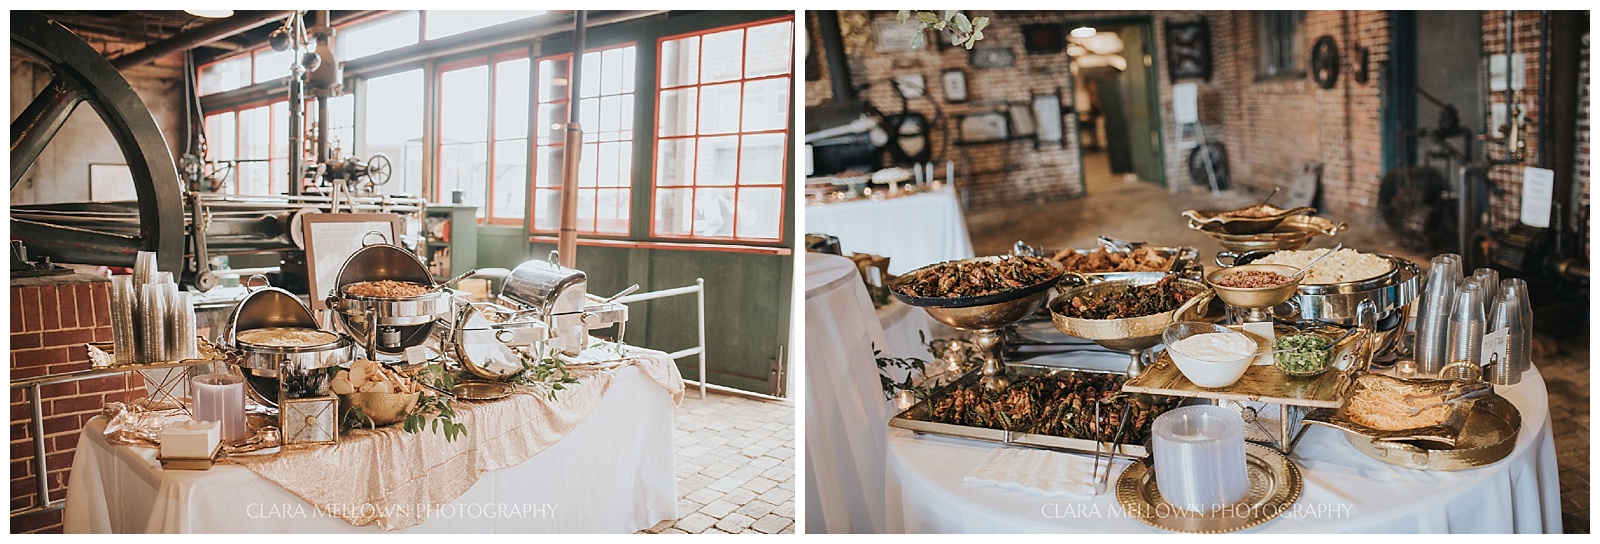 Coral and Pink Mississippi Wedding at Soule Steam Feed Works